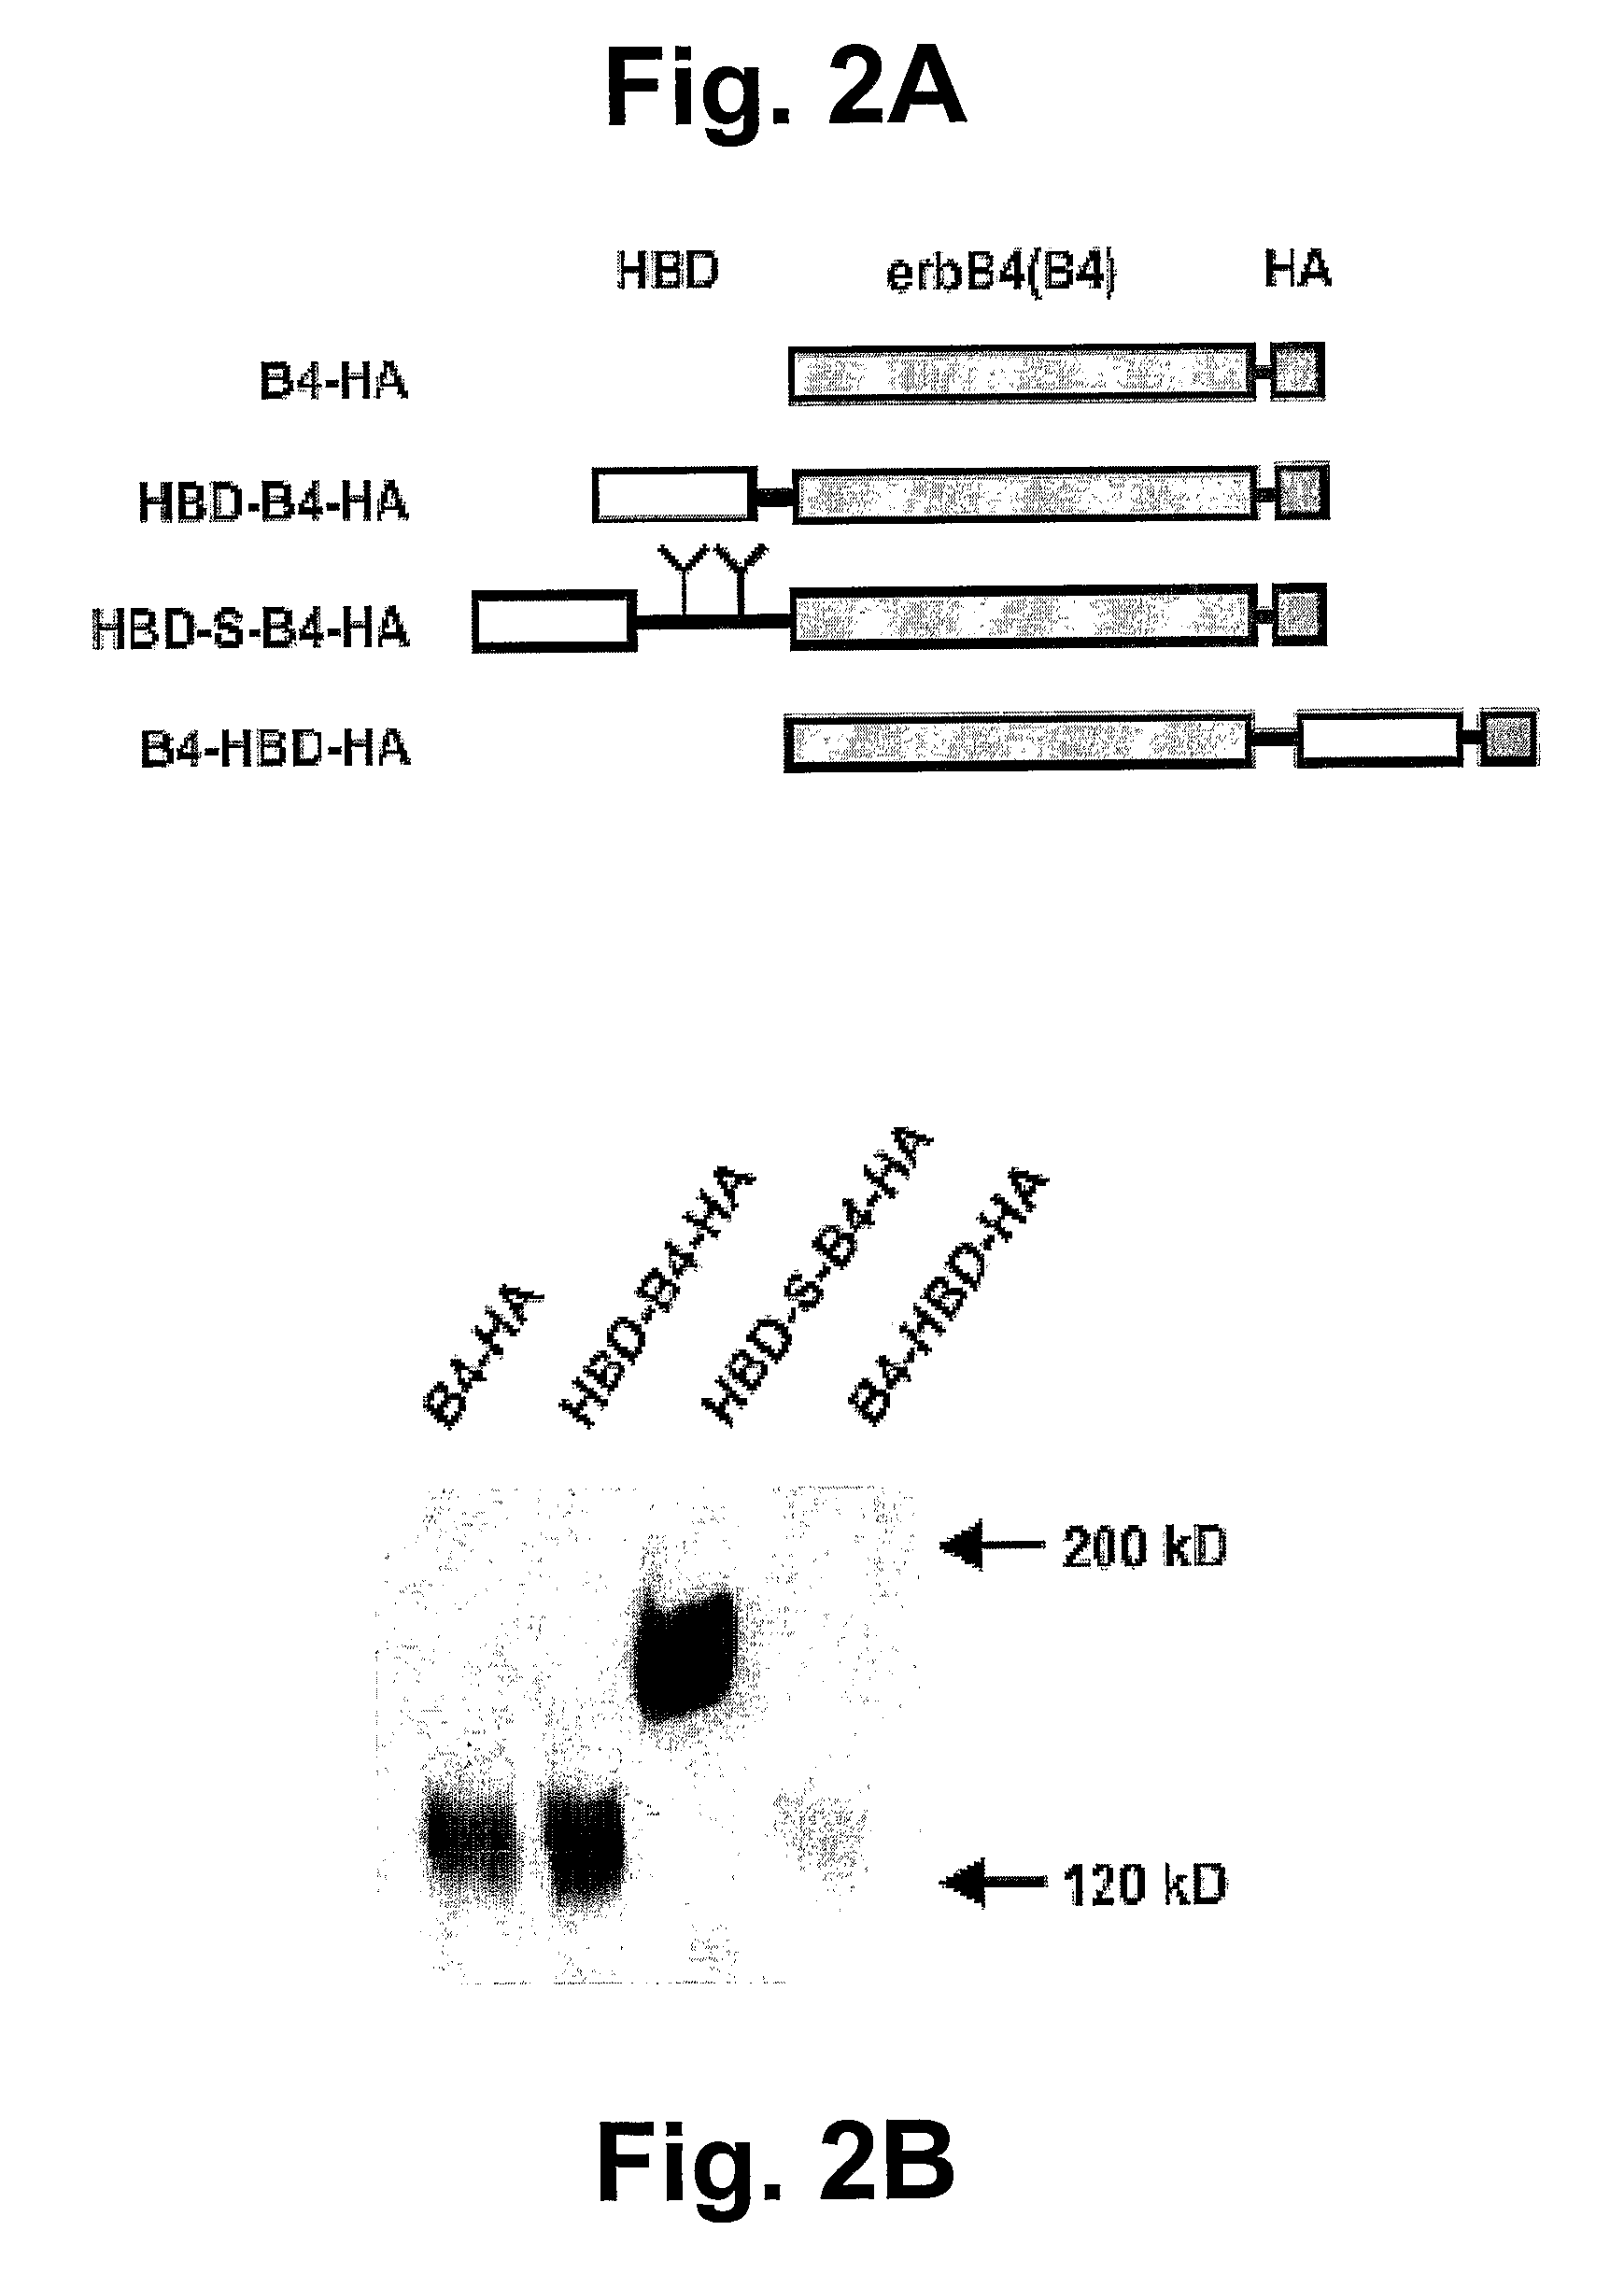 Hybrid Proteins with ErbB4 Extracellular Domain and Neuregulin Heparin-Binding Domain for Targeting